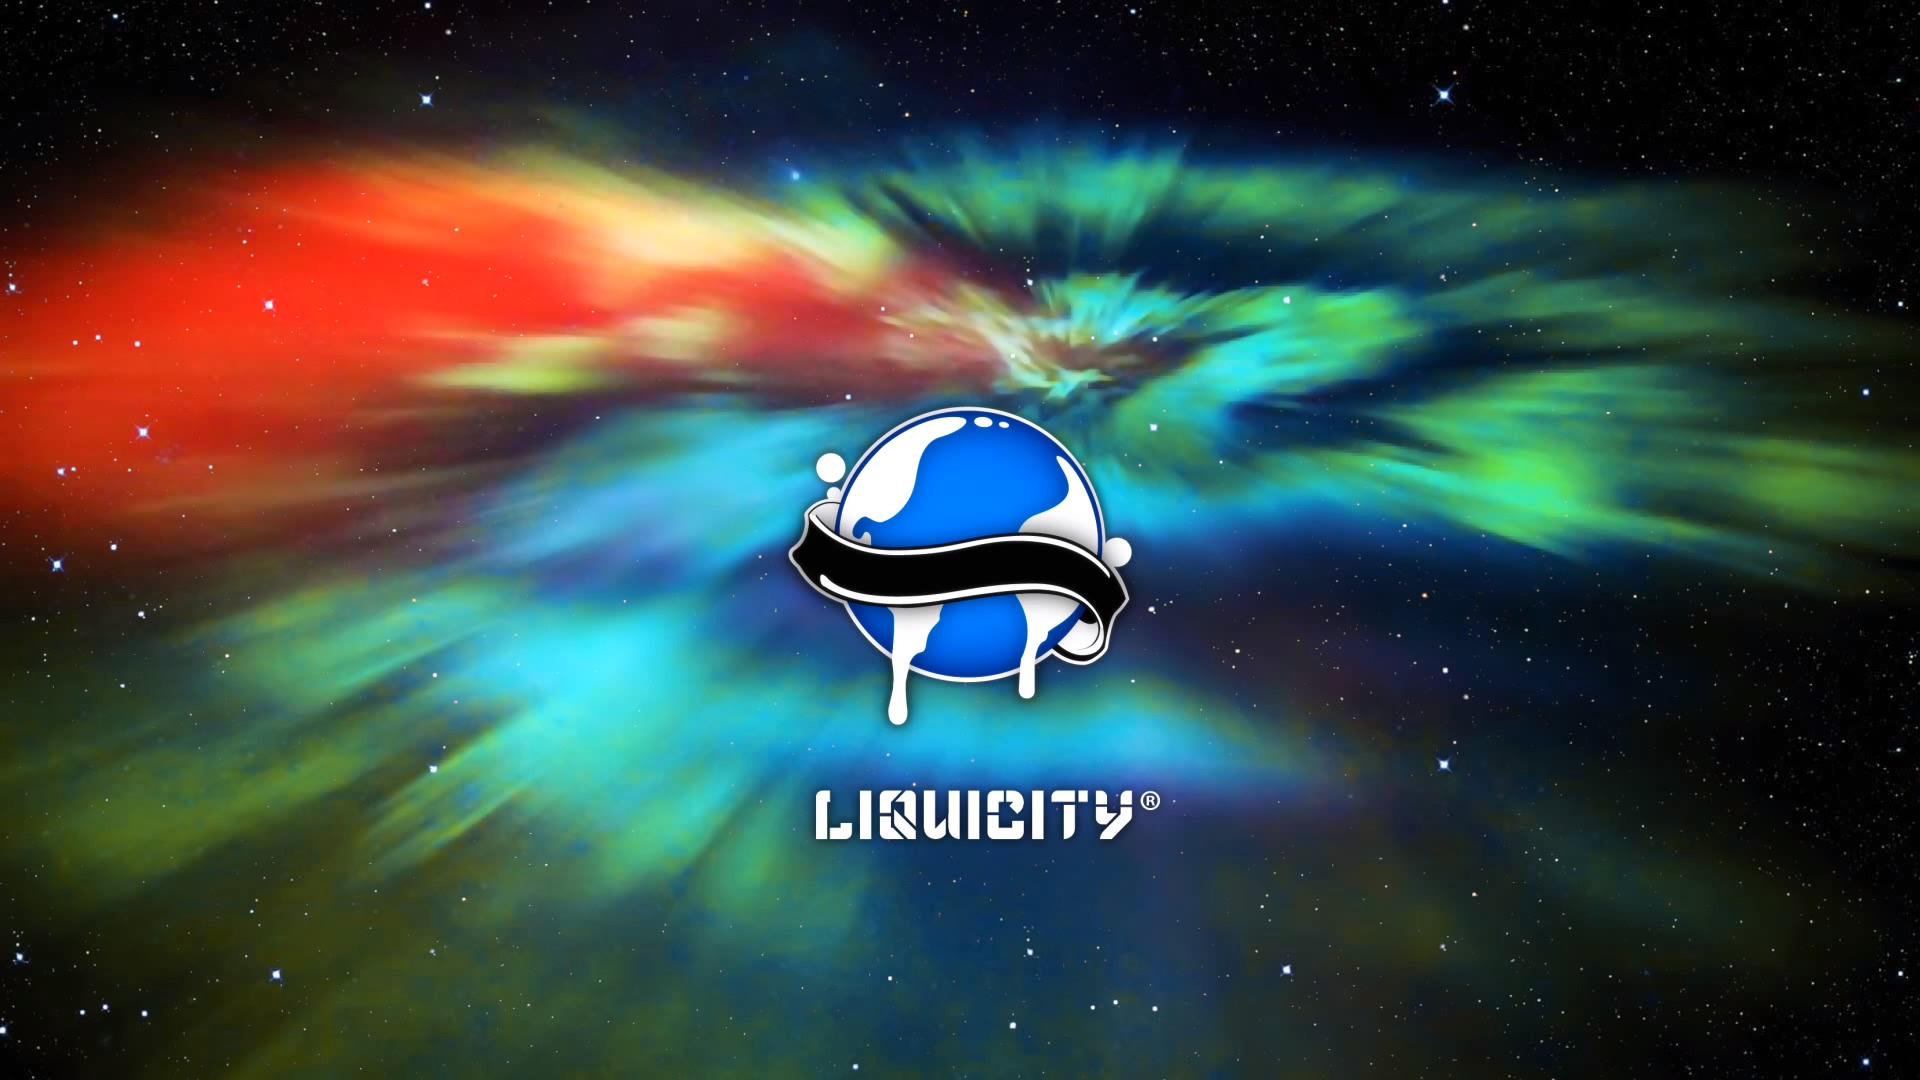 Liquicity, Space, Sky, Colorful Wallpaper